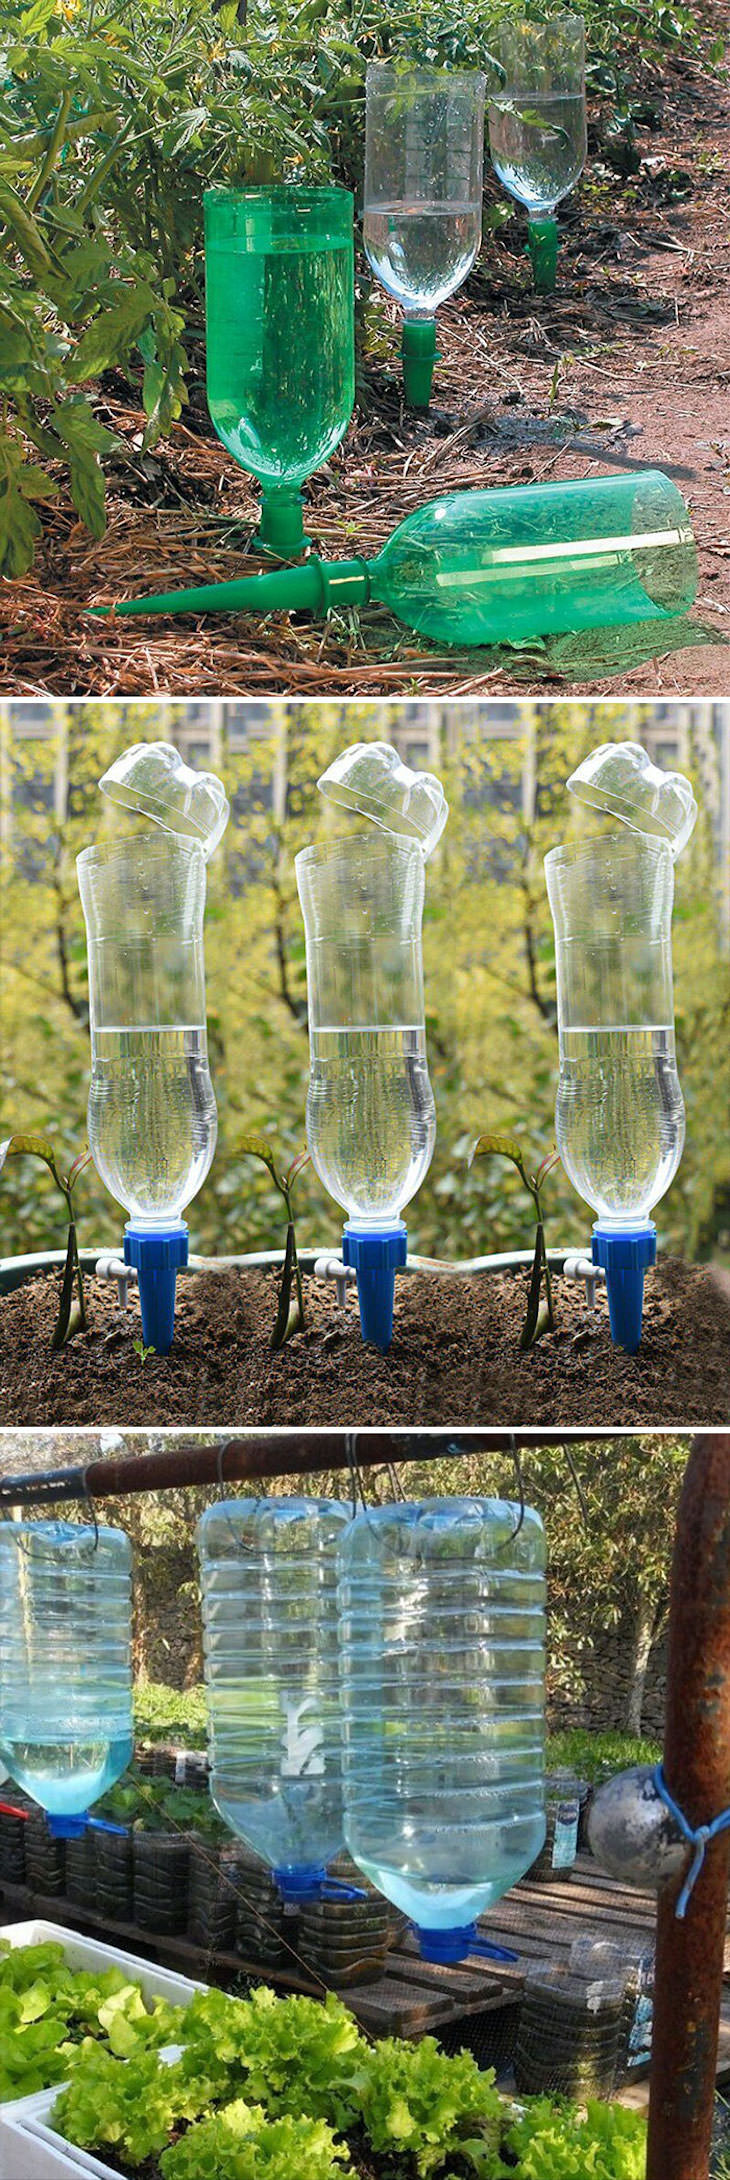 Creative Gardening Ideas and Tricks  Cool ideas for drip irrigation